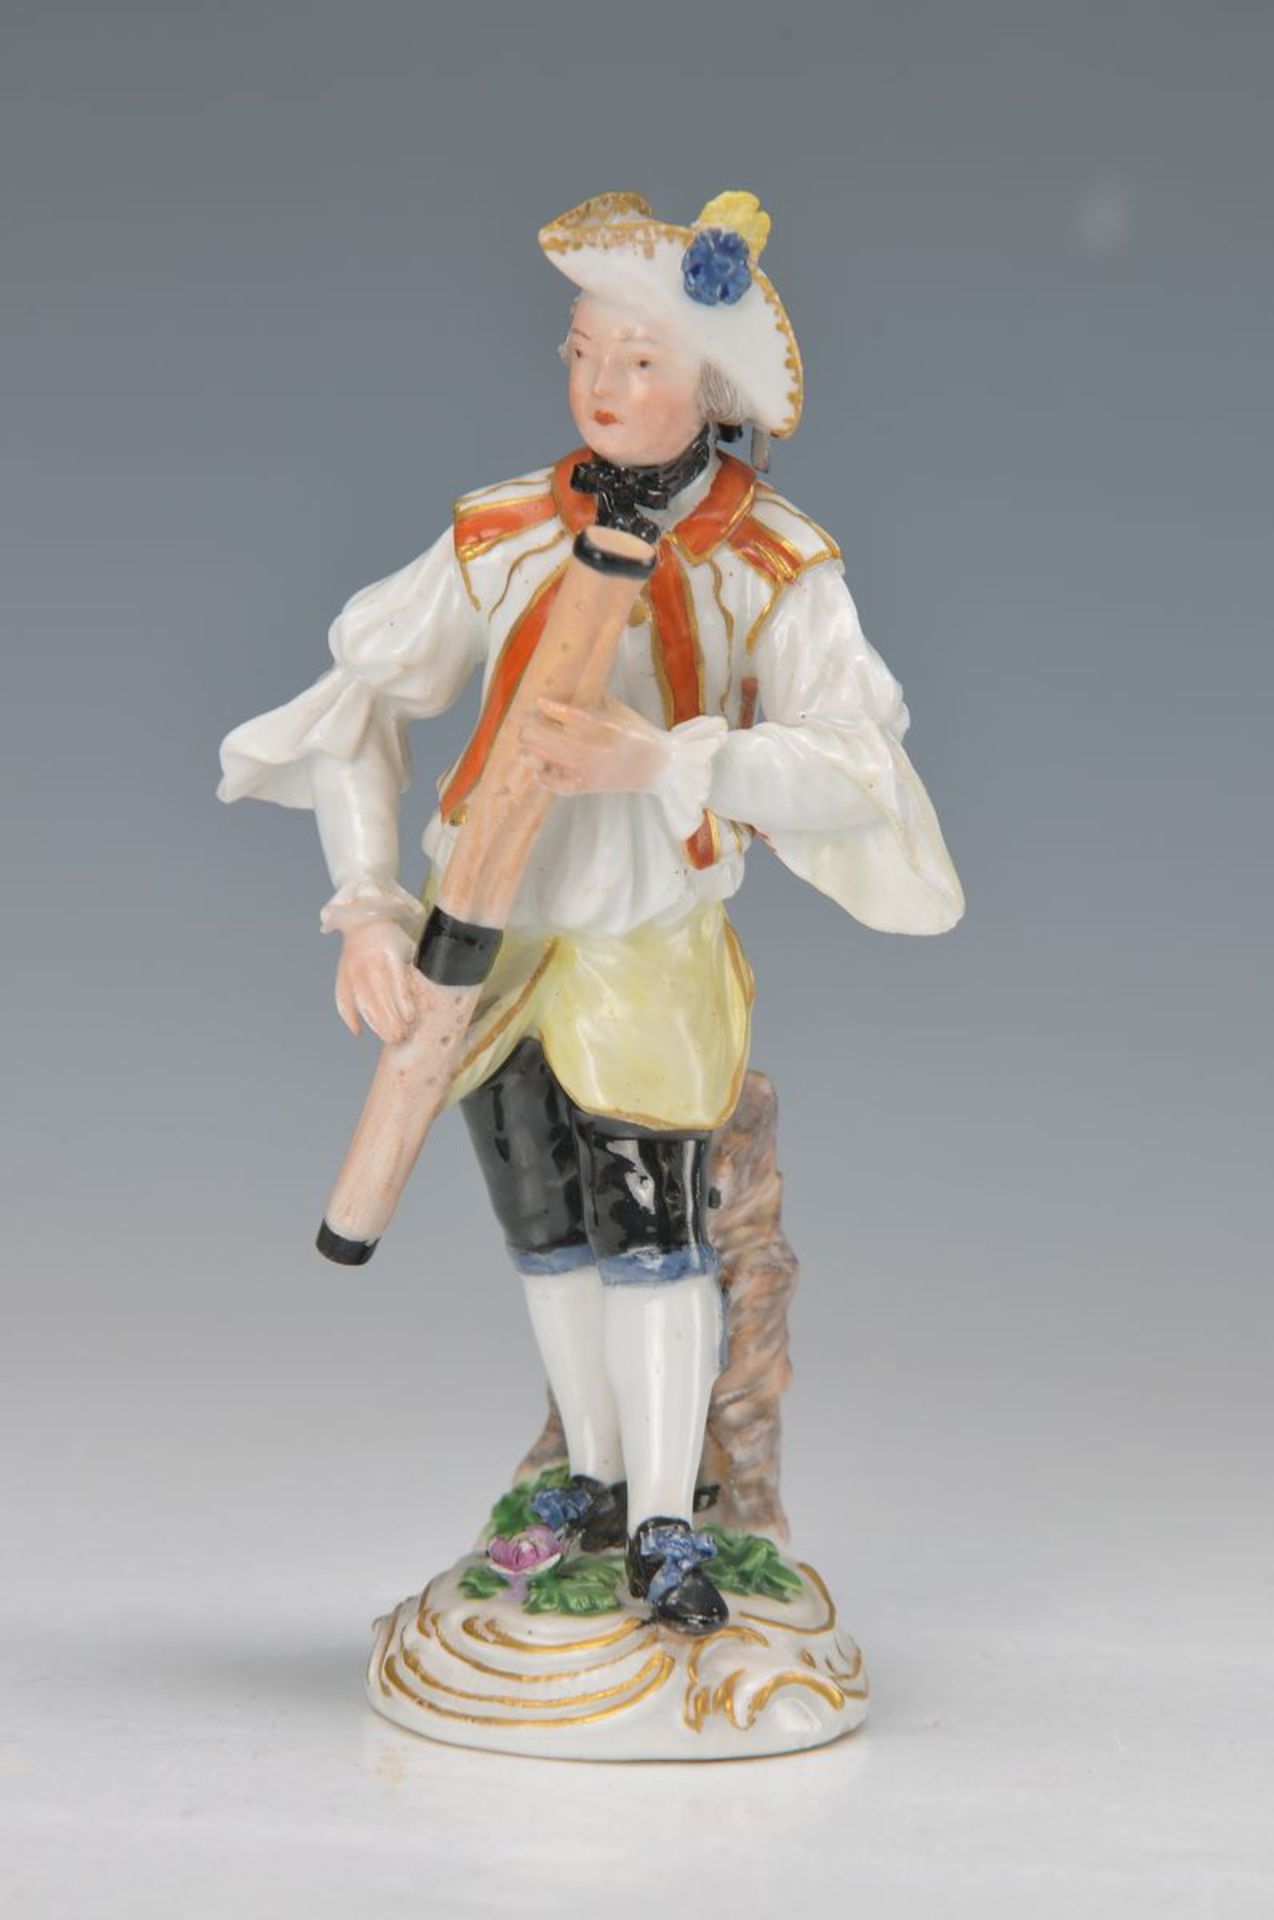 figurine, Meissen, around 1765, point time, bassoon player of the gallant band, designed by